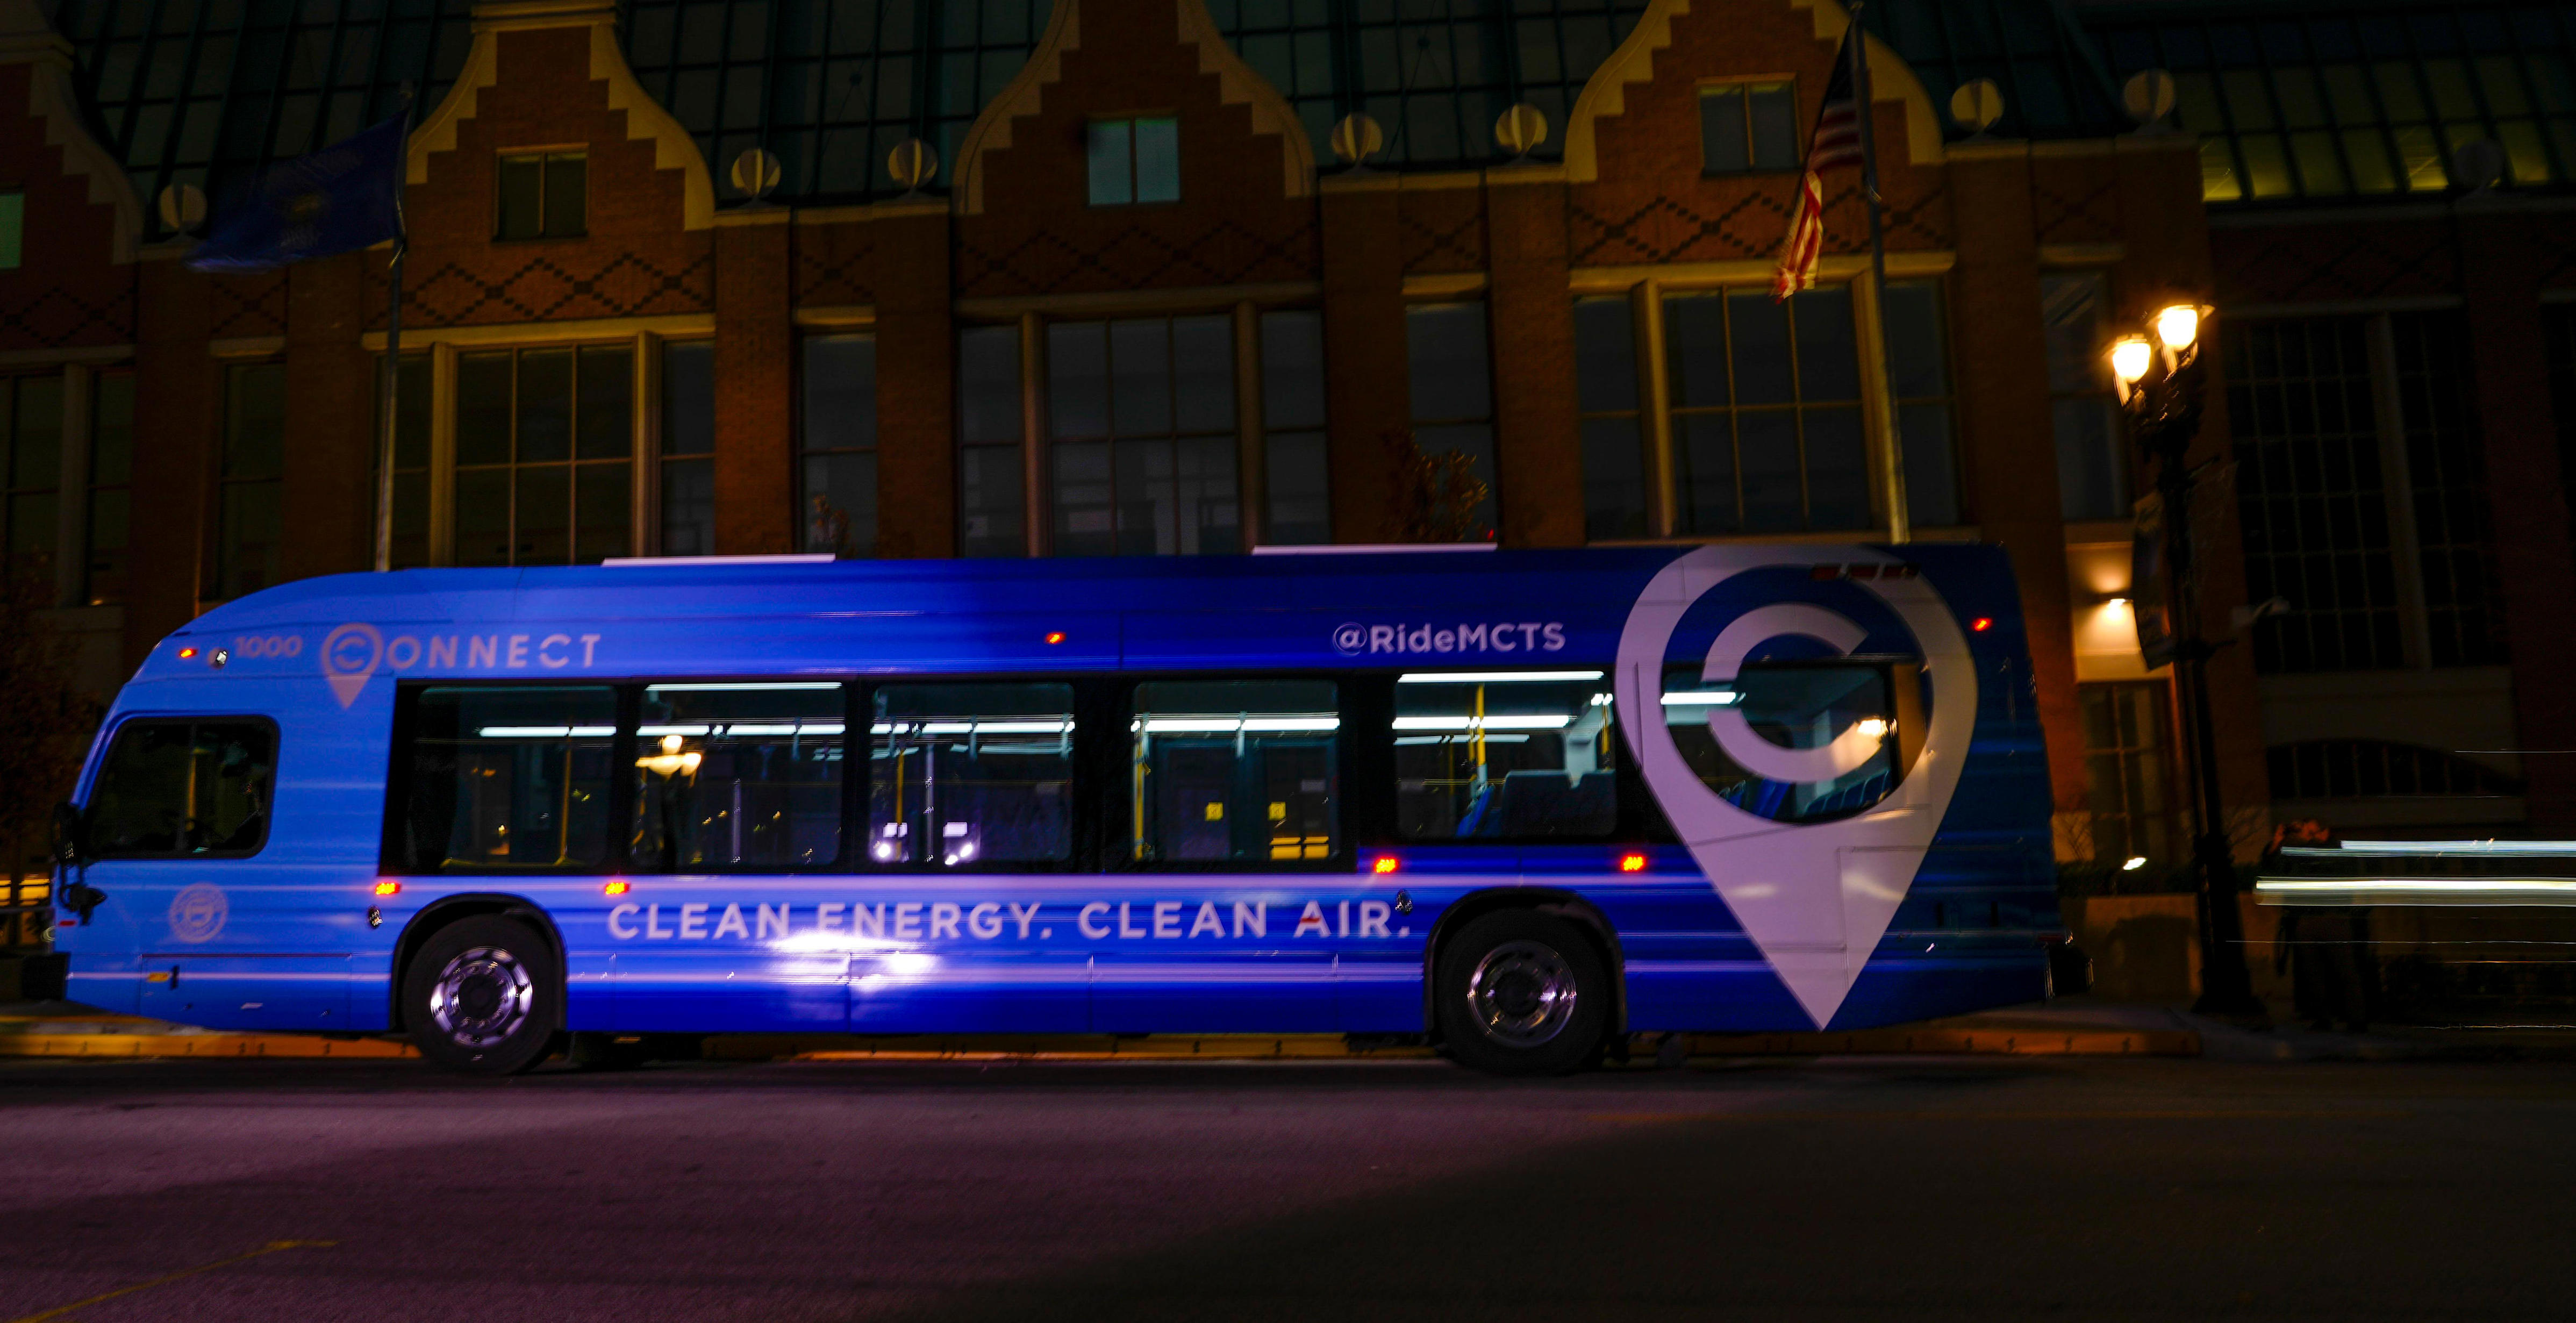 What to know about MCTS shuttles returning to Summerfest 2023